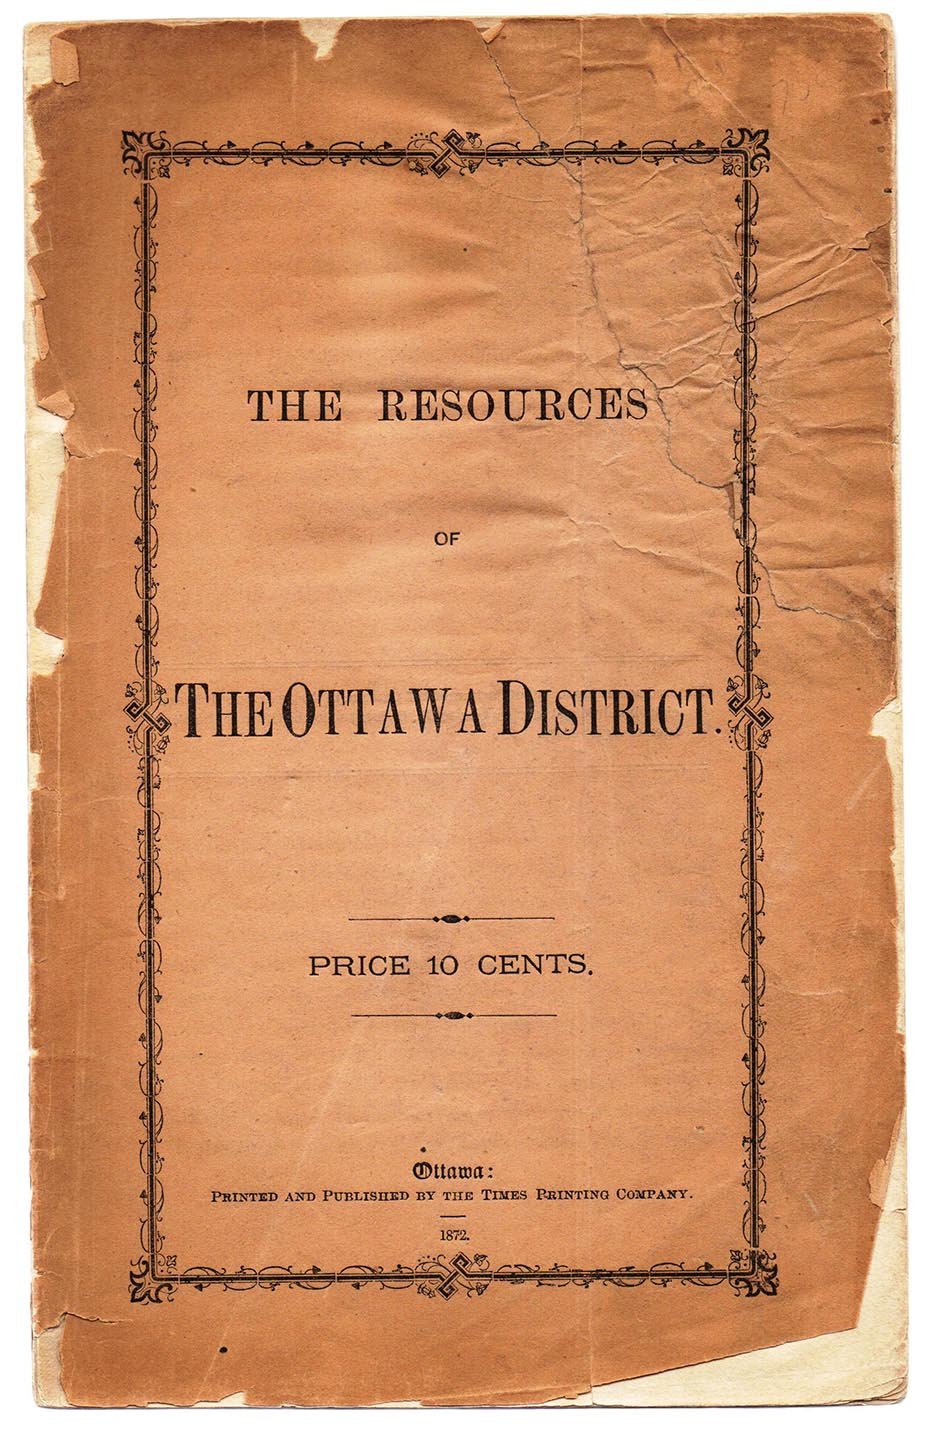 The Resources of the Ottawa District